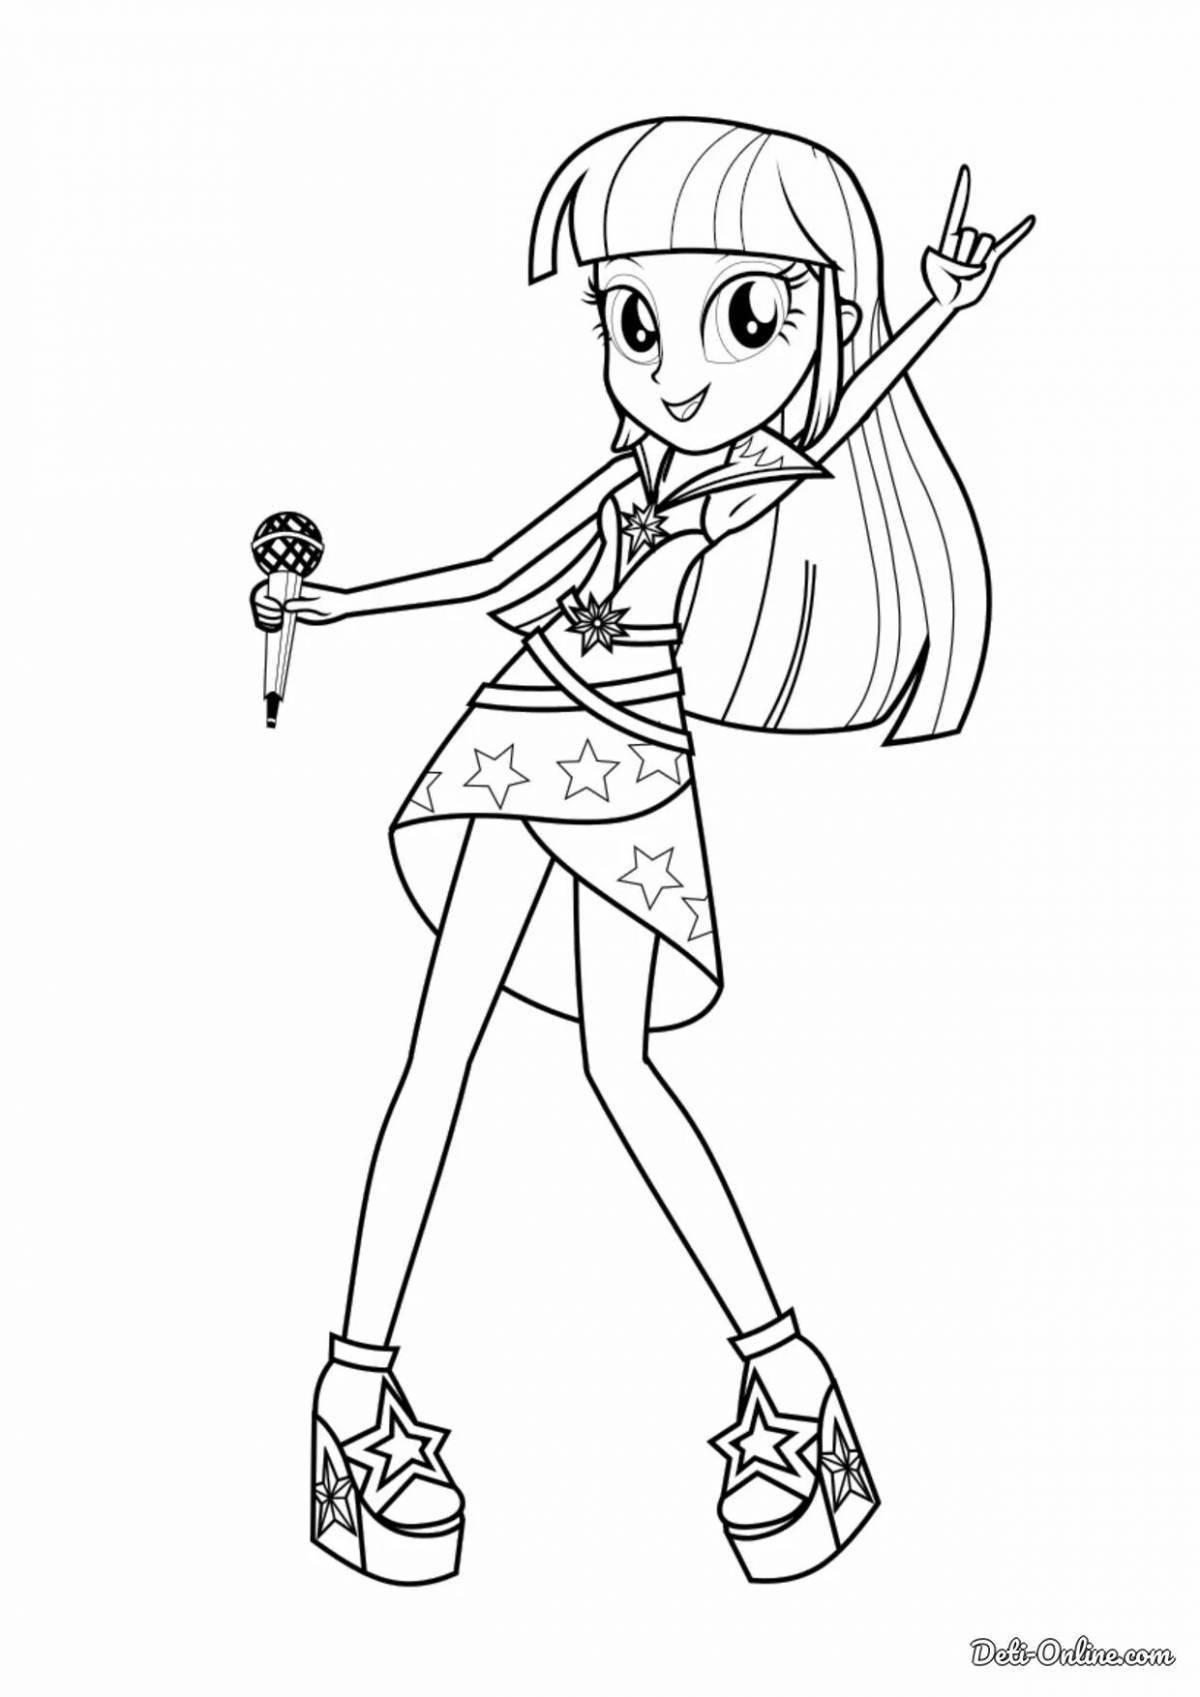 Coloring page joyous equestria girls pinkie pie